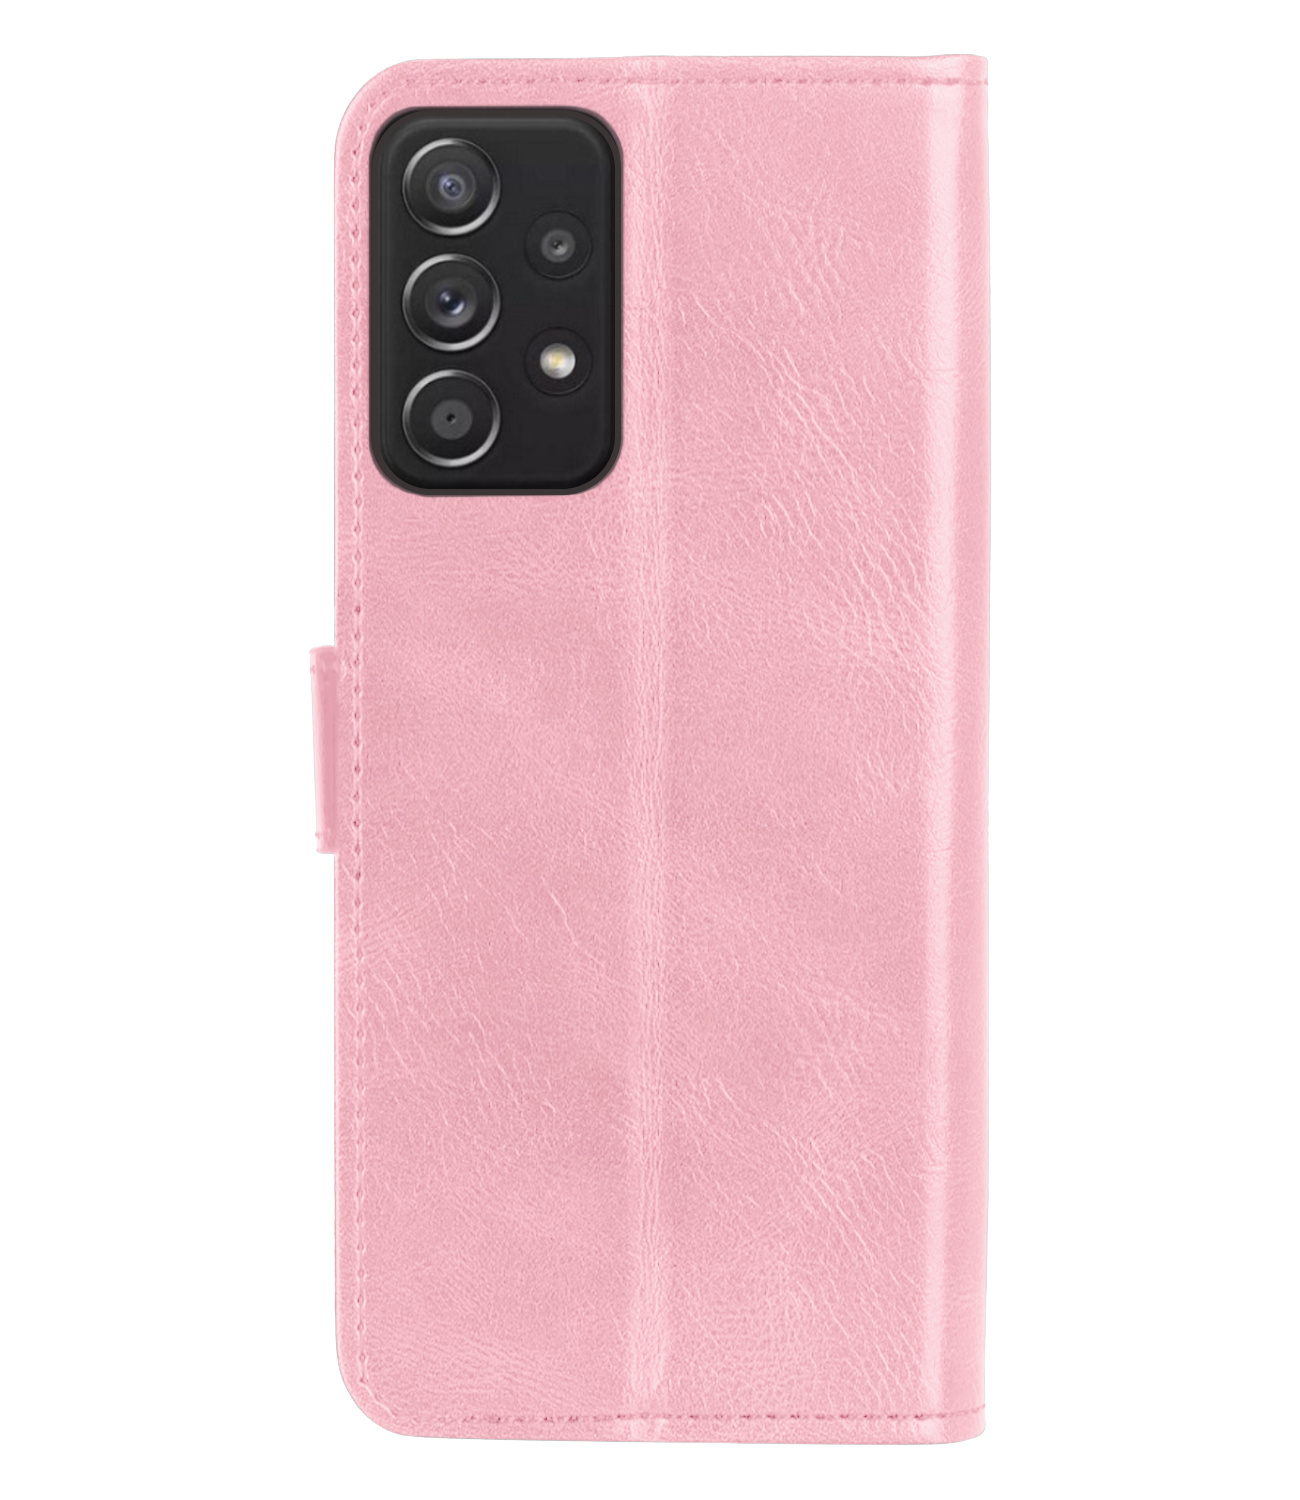 Nomfy Samsung Galaxy A53 Hoes Bookcase Licht Roze - Flipcase Licht Roze - Samsung Galaxy A53 Book Cover - Samsung Galaxy A53 Hoesje Licht Roze